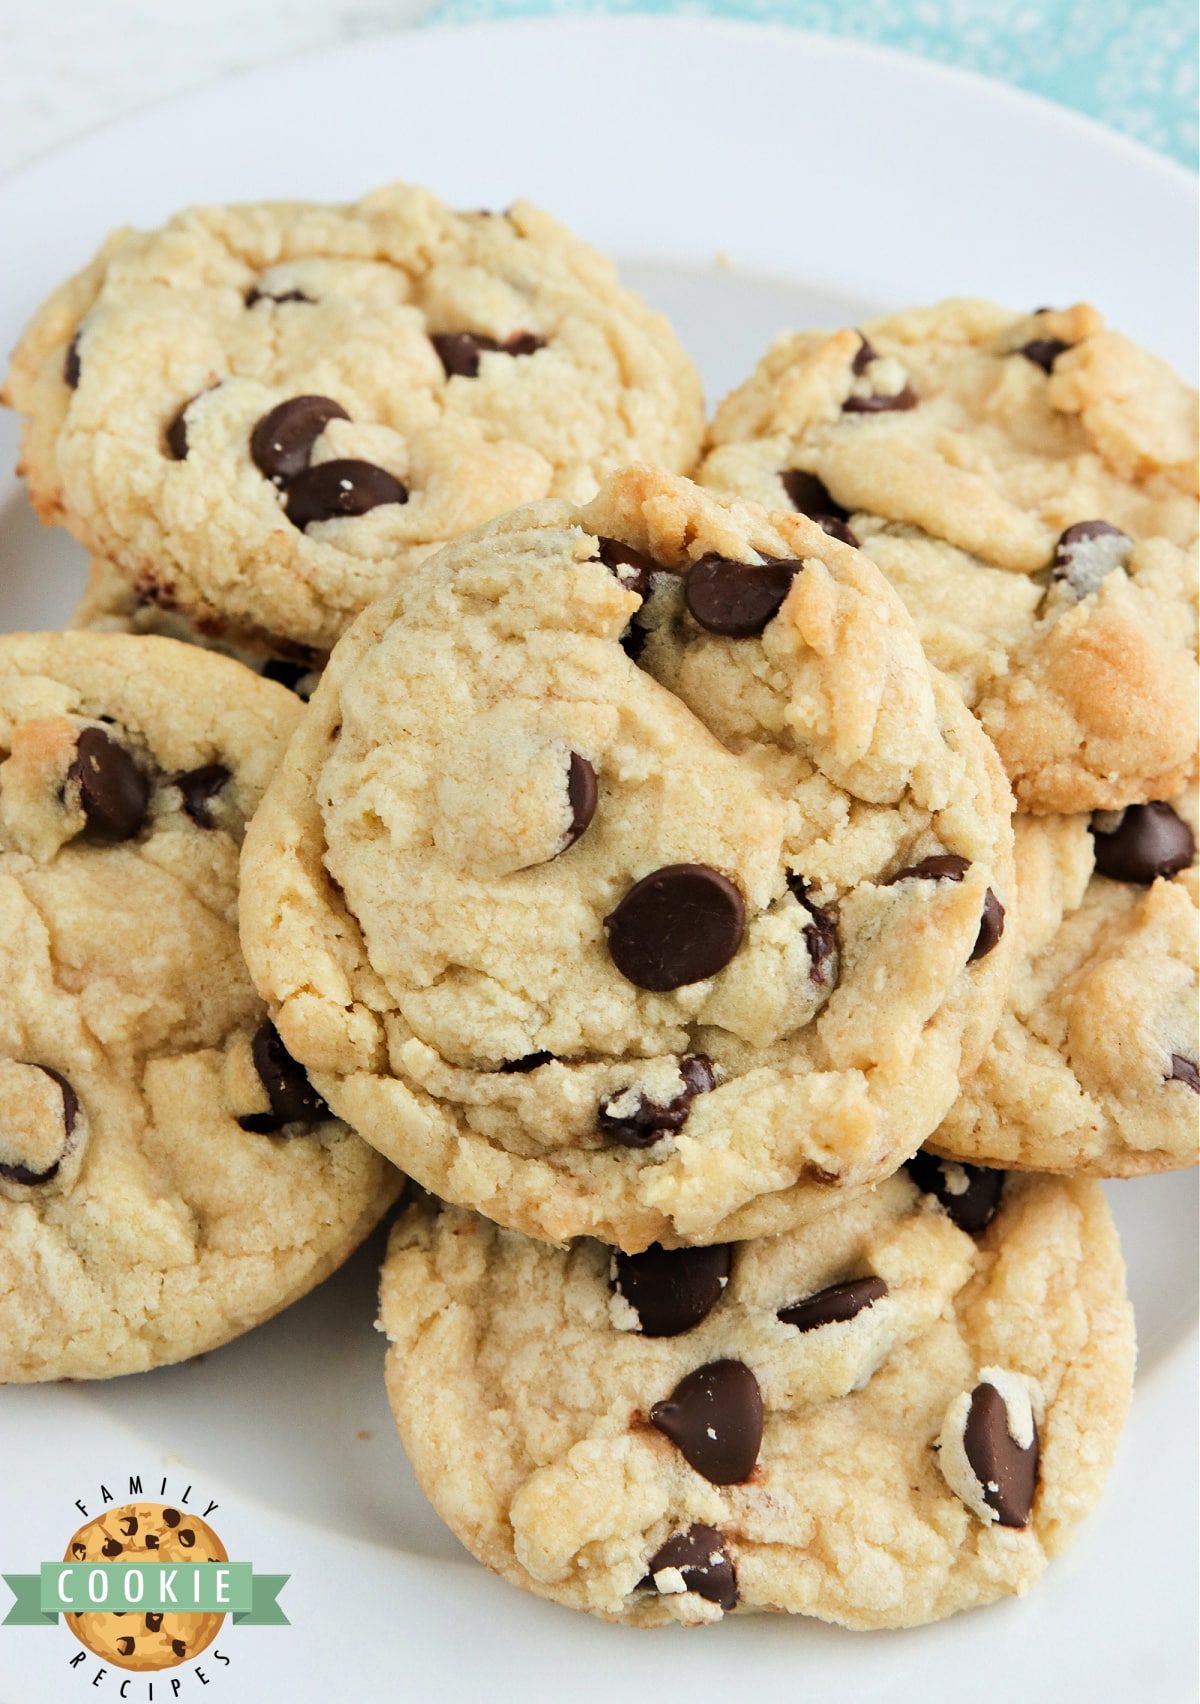 The best Chocolate Chip Cookies are soft, chewy and easy to make too! After trying dozens of different chocolate chip cookie recipes, I decided that I like this one the best!